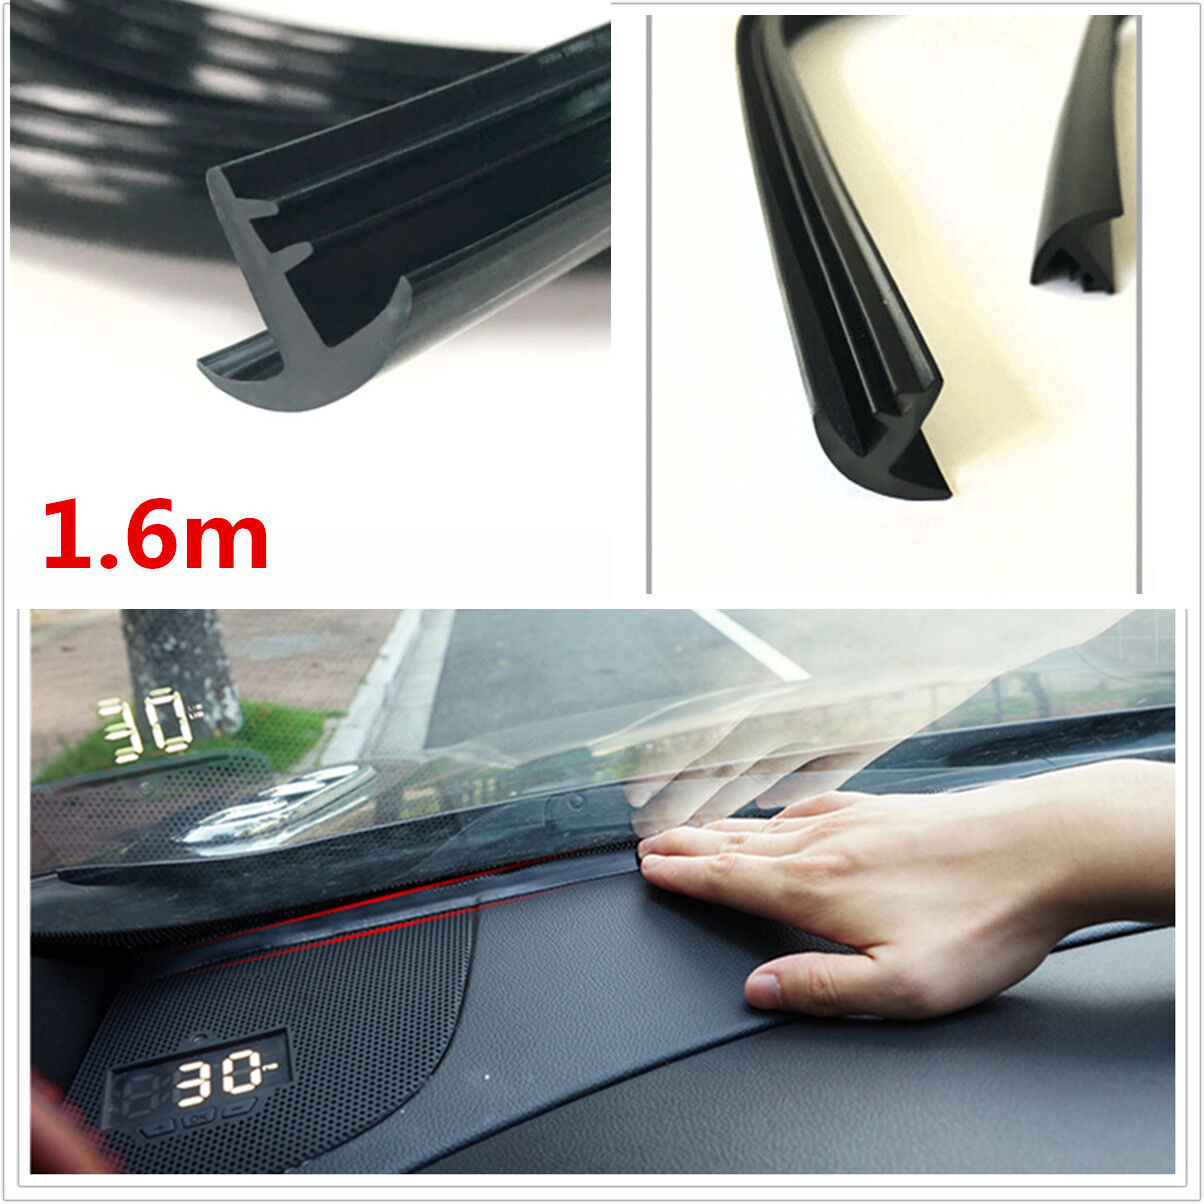 Rubber 1.6m Soundproof Dustproof Sealing Strip for Auto Car Dashboard Windshield